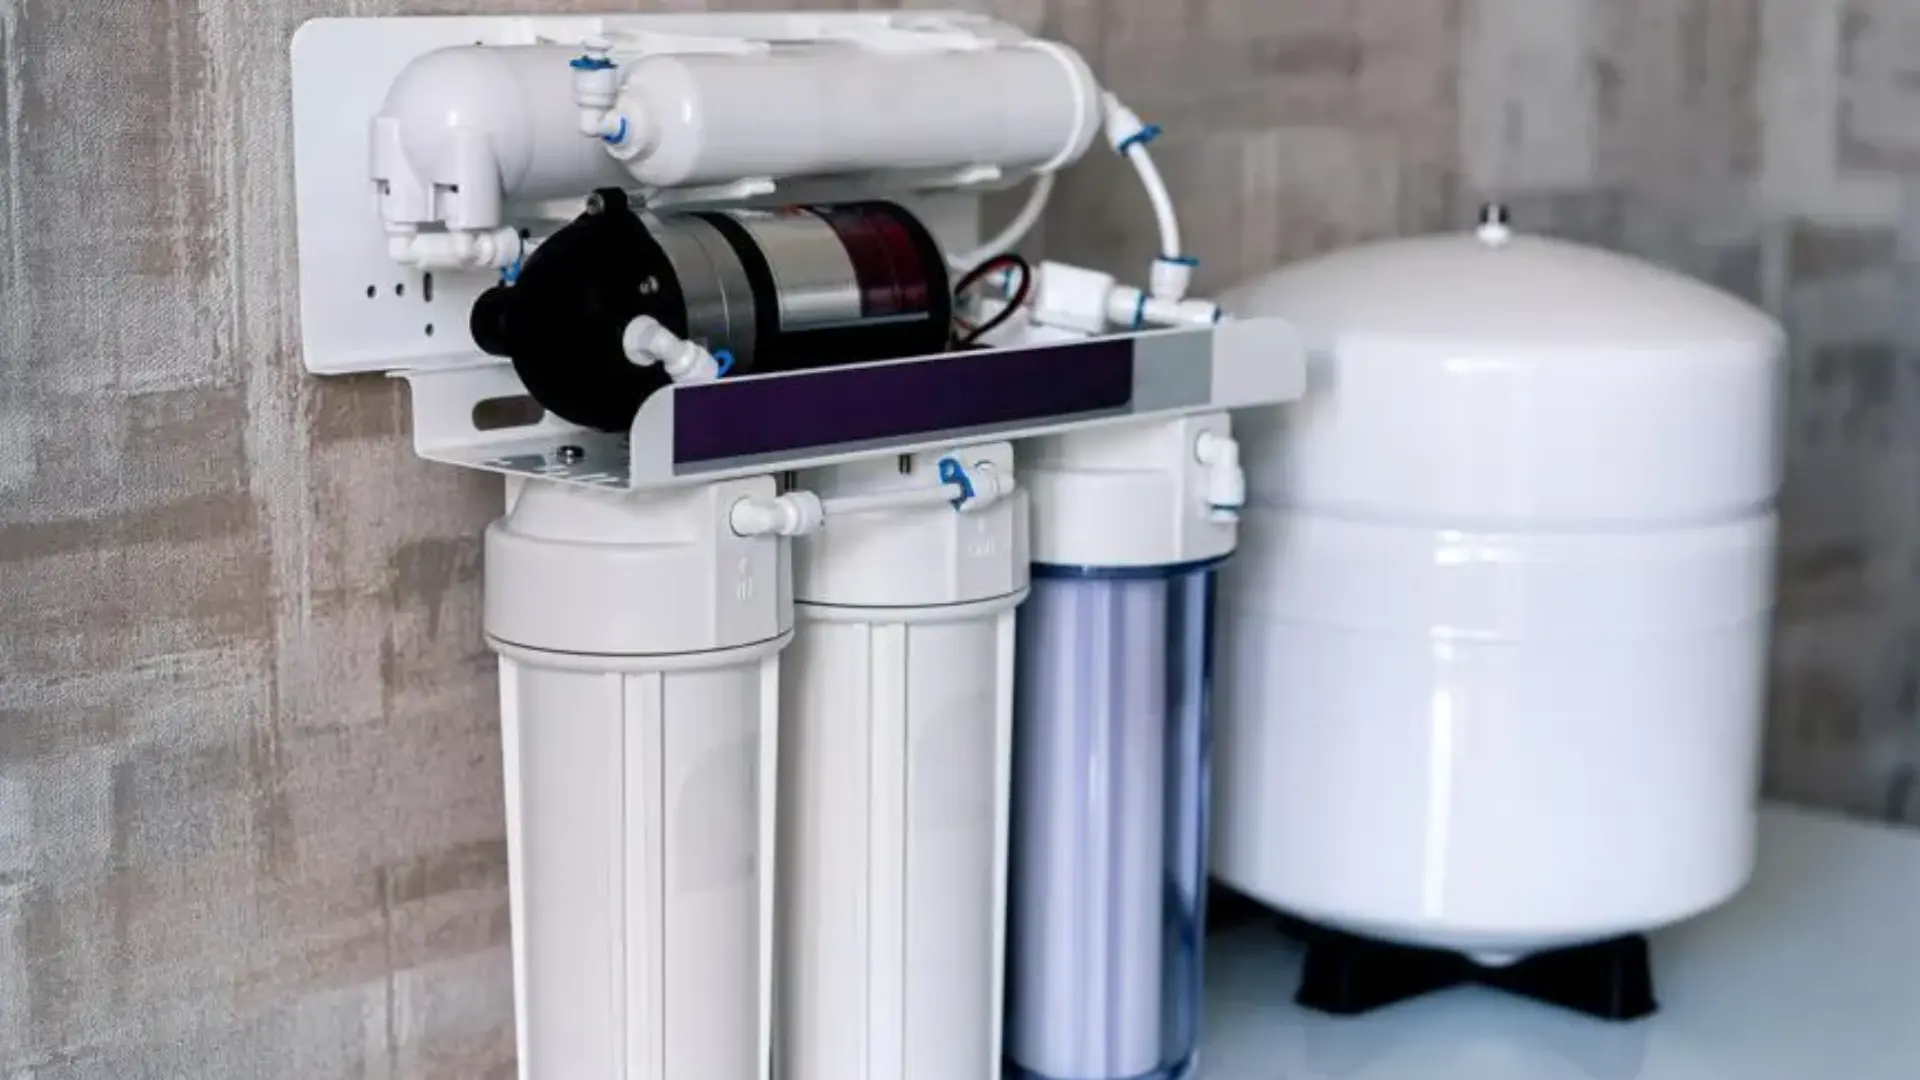 A Whole House Water Filter Based on Water Quality and Usage